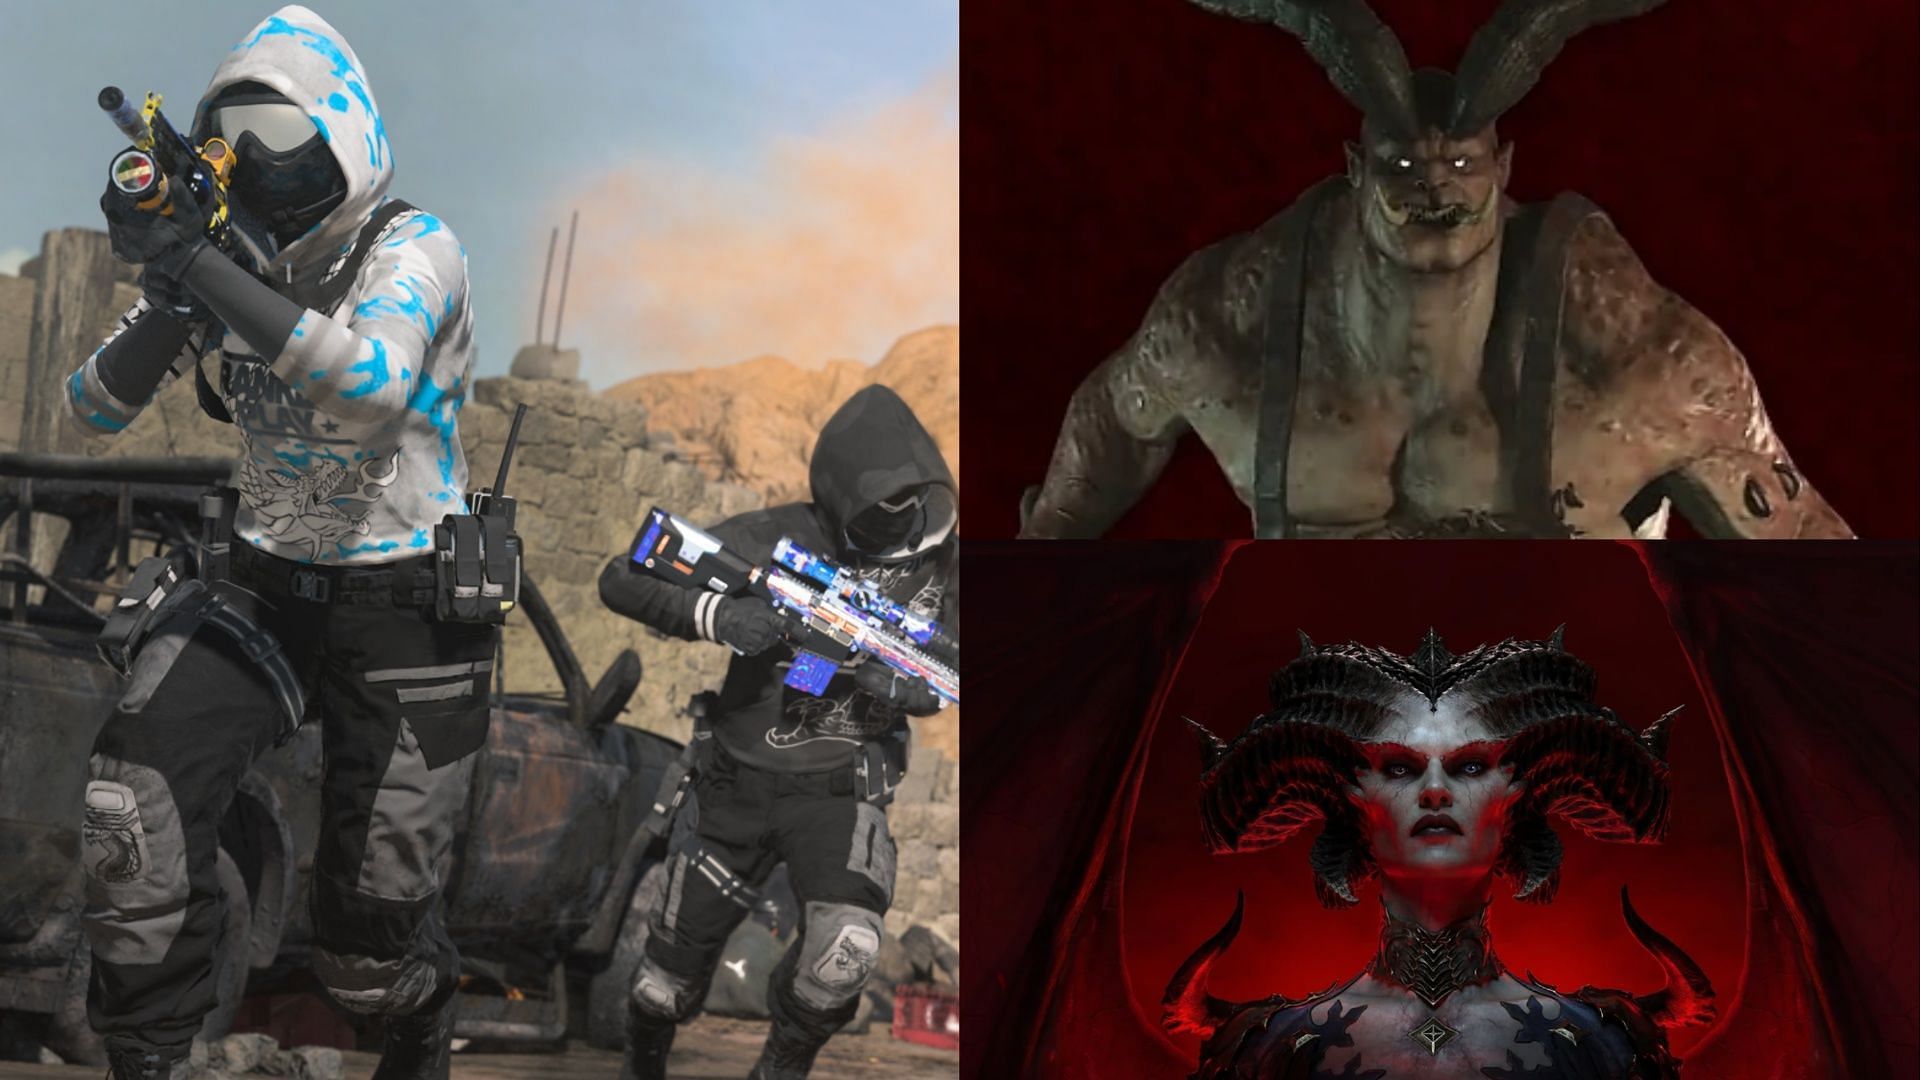 Diablo 4 Operators Come To Call Of Duty With Spawn In Season 6